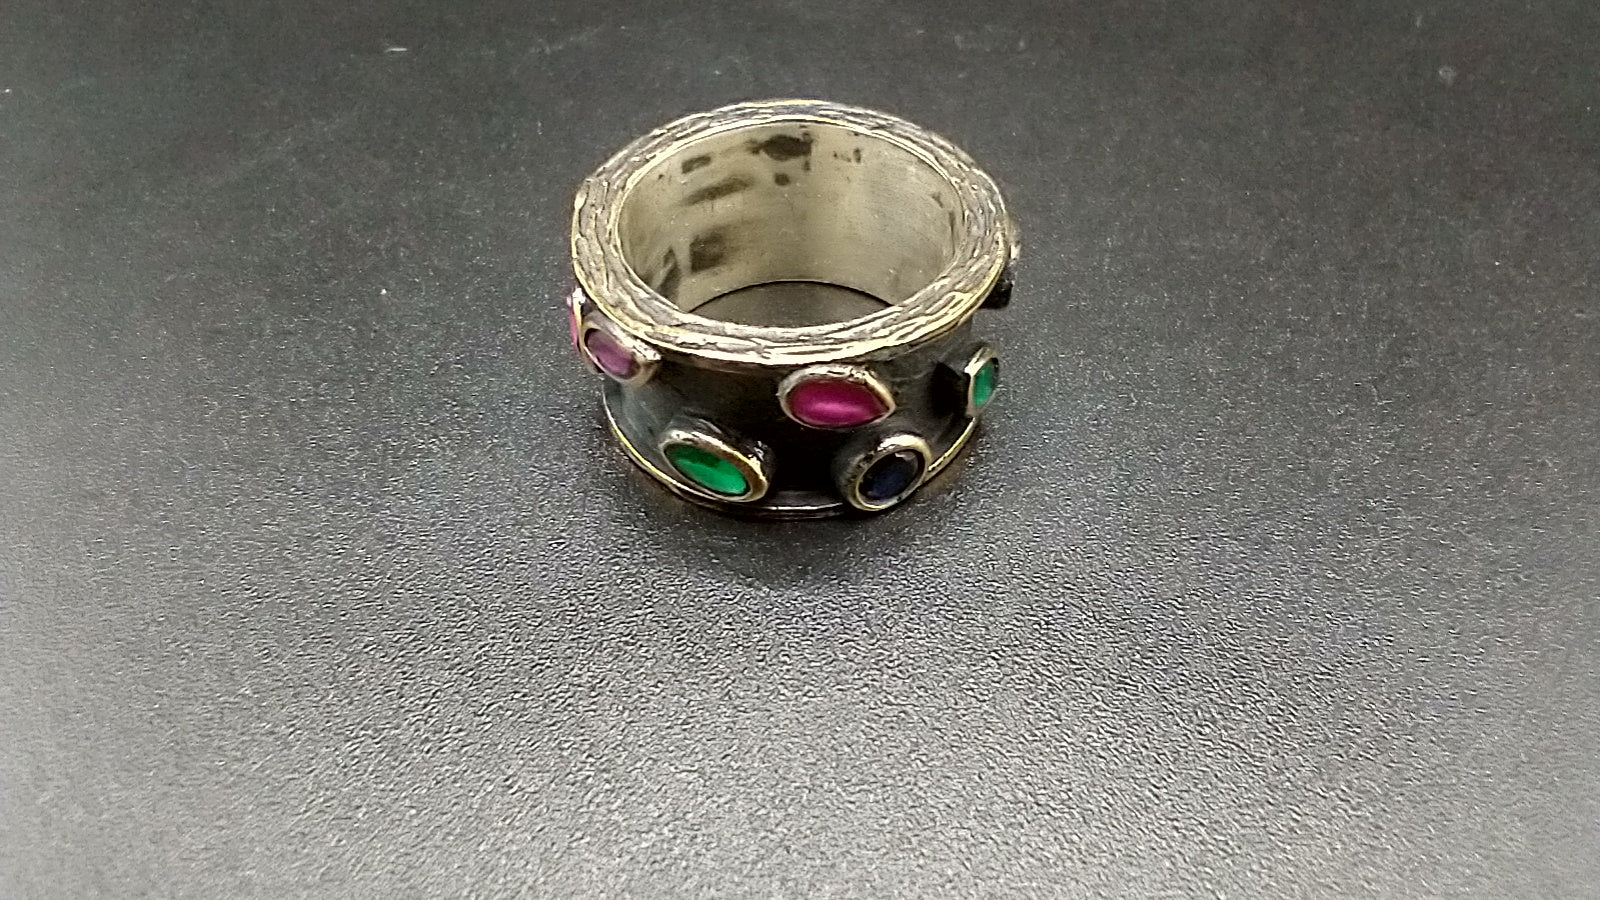 "POTPOURRI" Mixed stones 925 sterling silver ring size 7...$60.